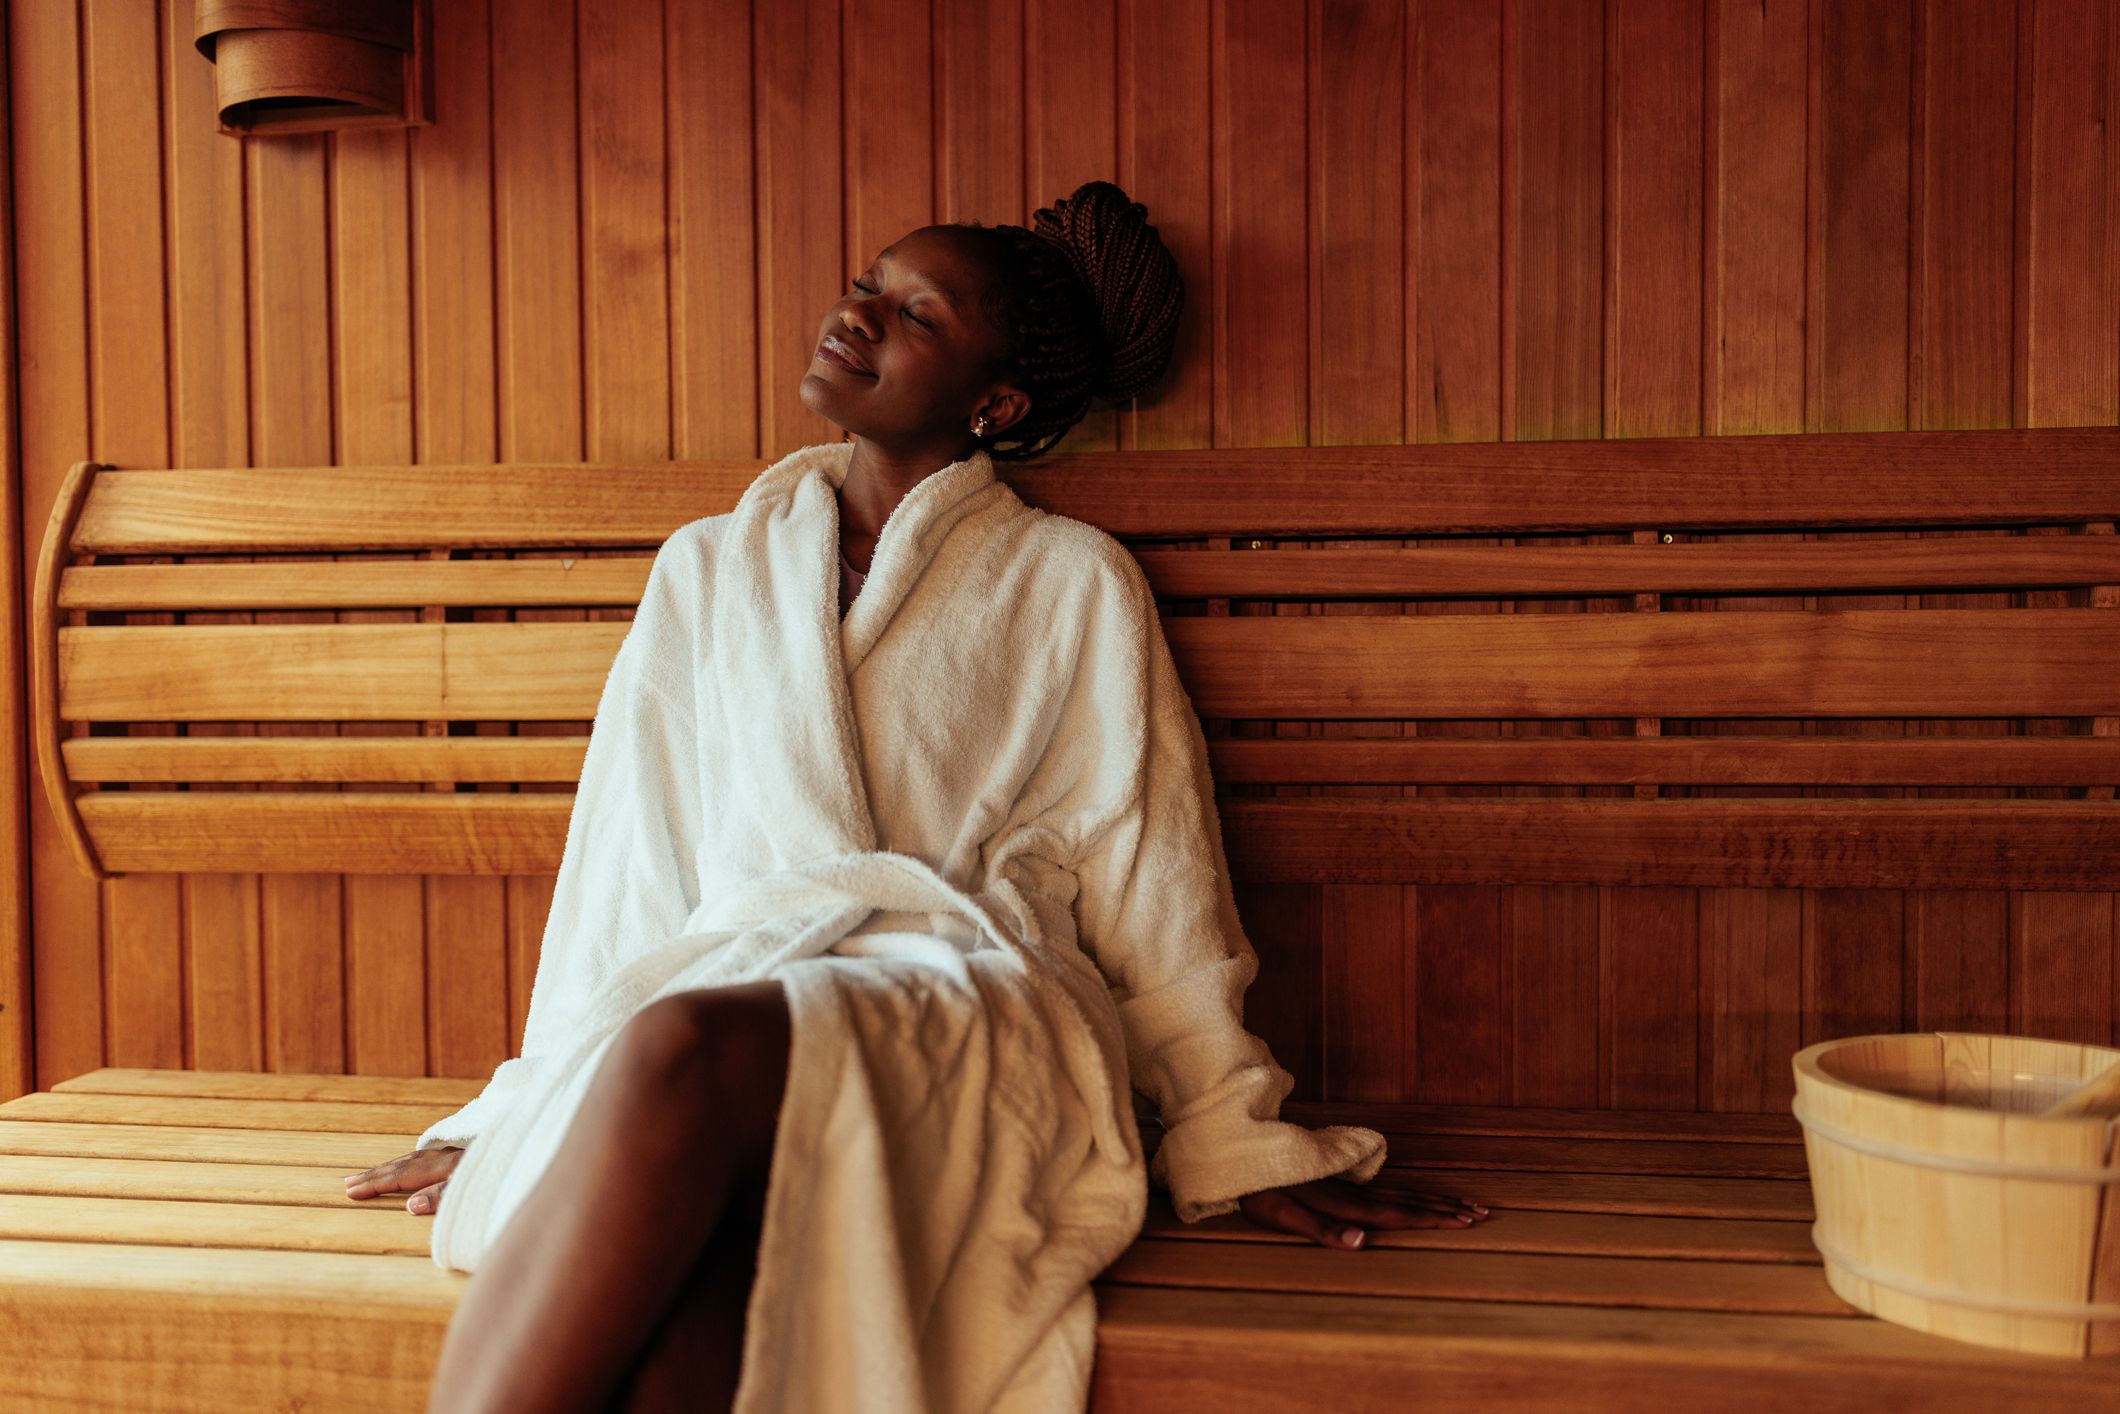 Dry Saunas: Benefits and Comparison with Steam Rooms, Infrared